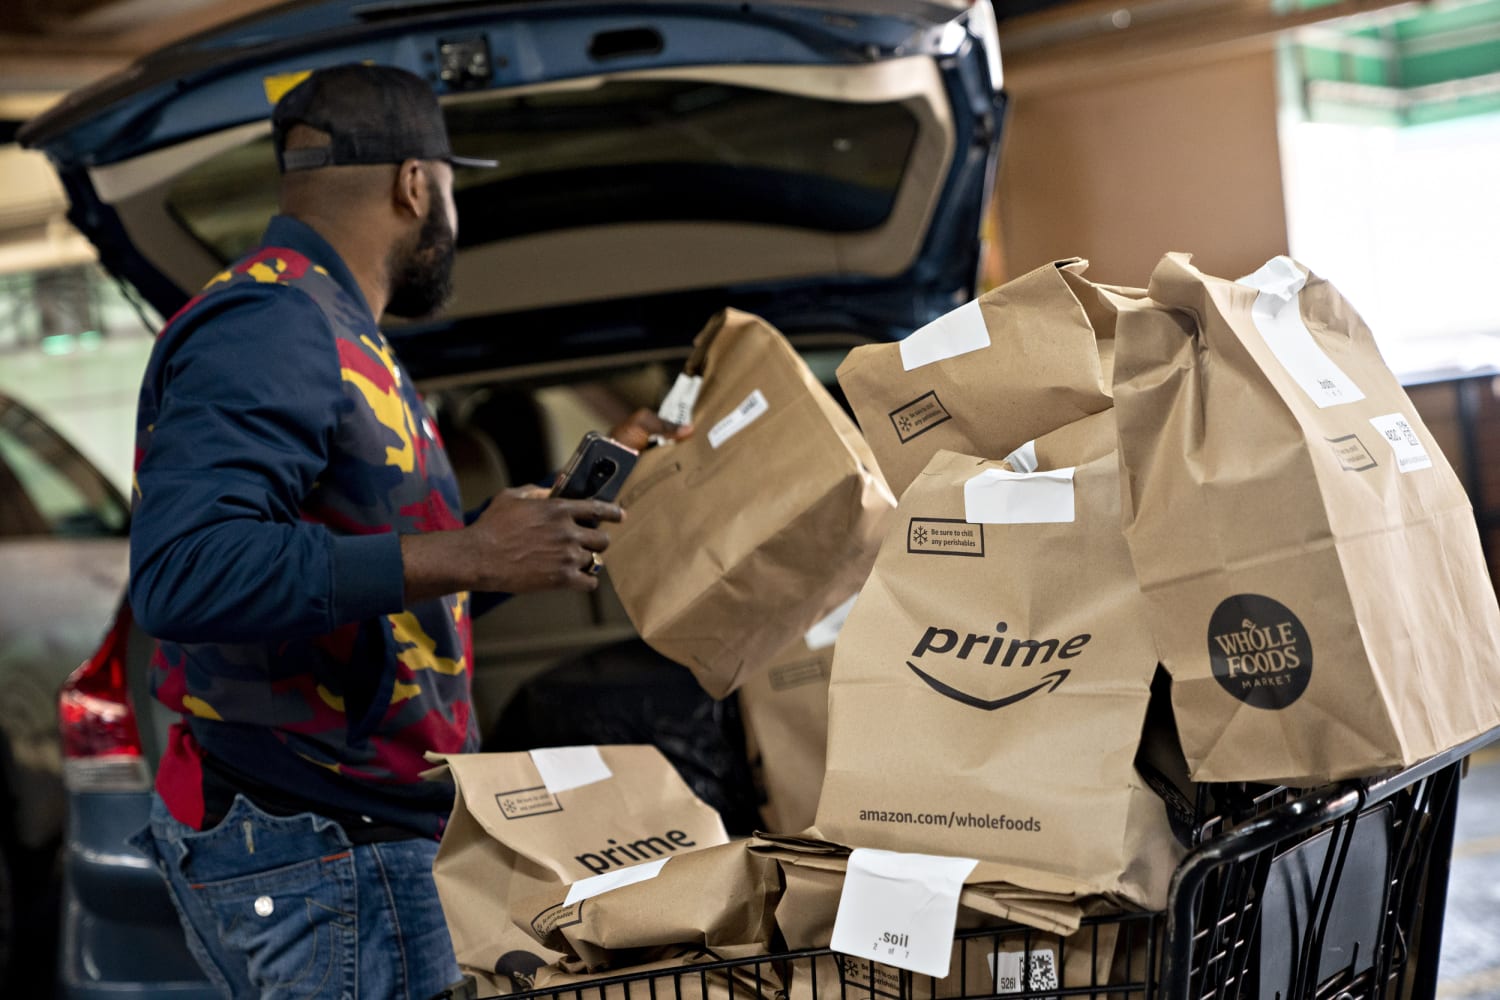 stops accepting new online grocery customers amid surging demand